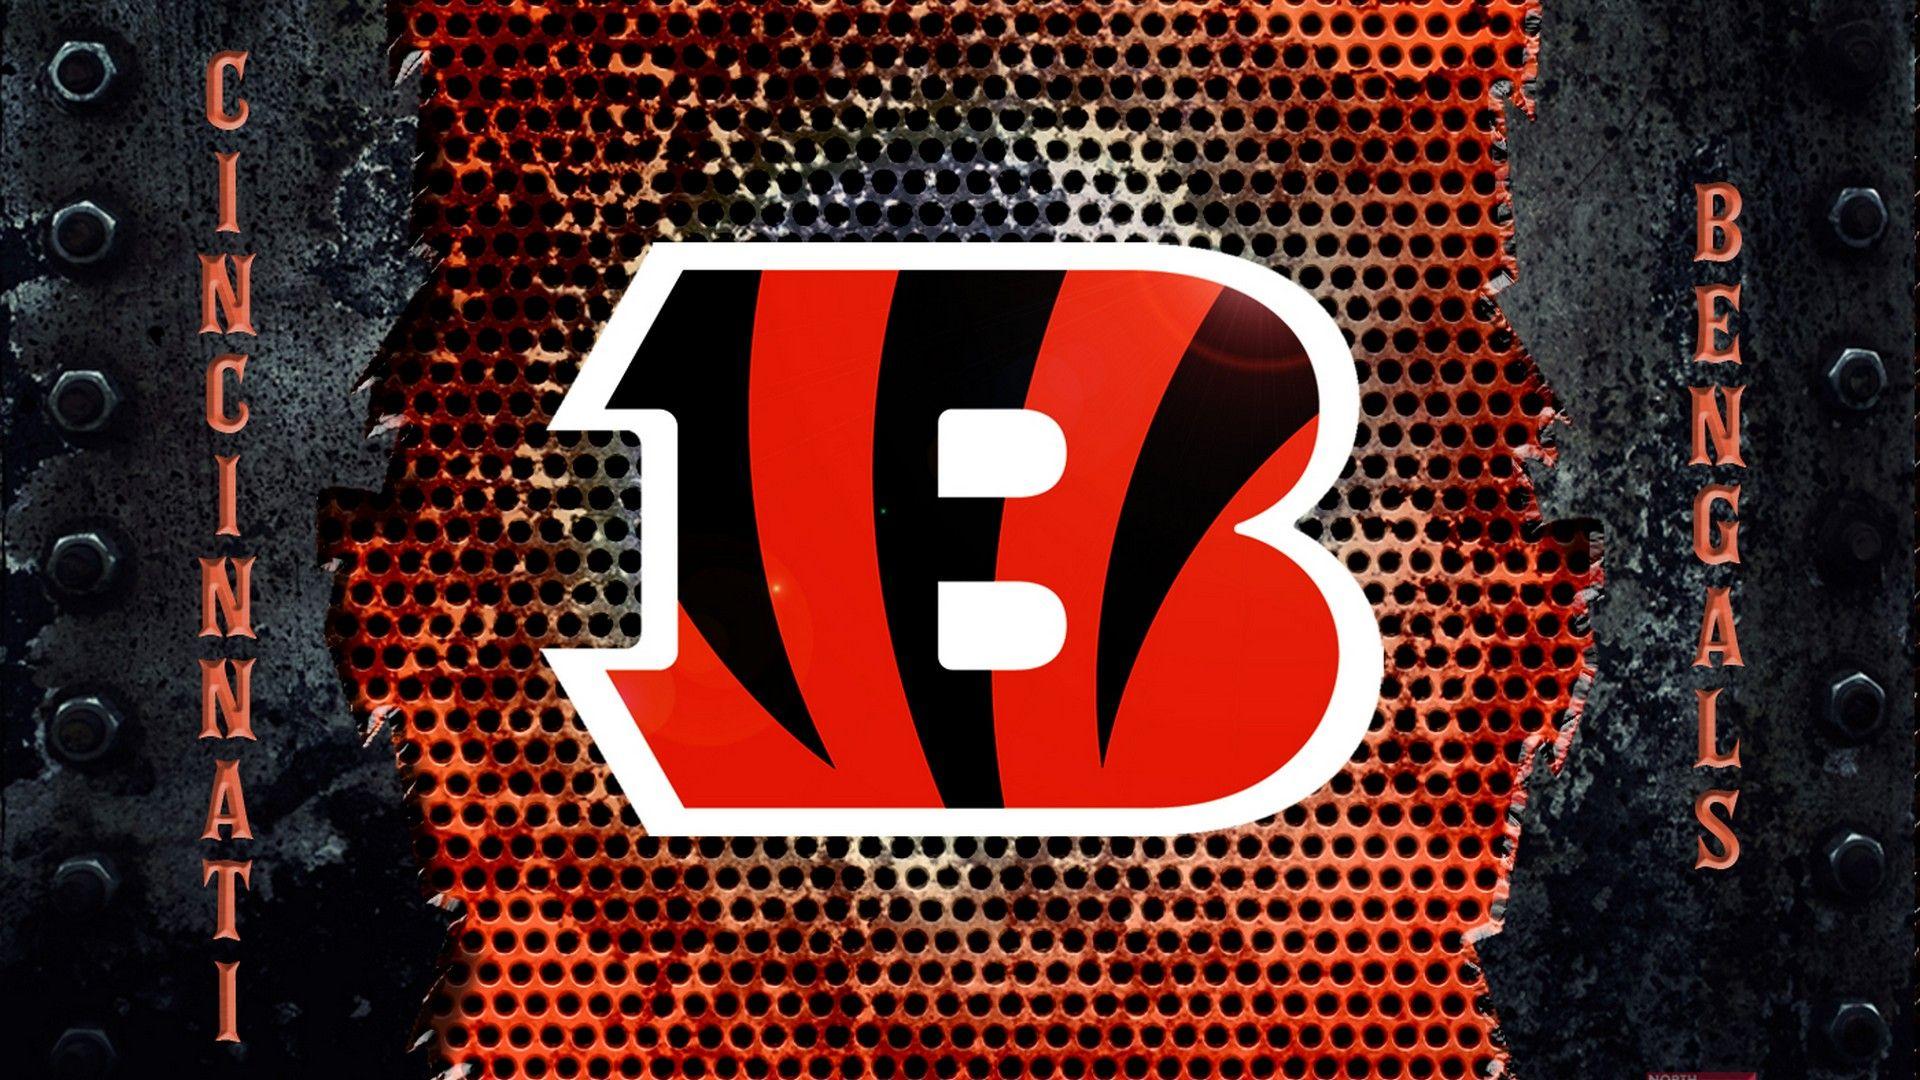 Download wallpapers Cincinnati Bengals flag 4k orange and black 3D waves  NFL american football team Cincinnati Bengals logo american football  Cincinnati Bengals for desktop with resolution 3840x2400 High Quality HD  pictures wallpapers